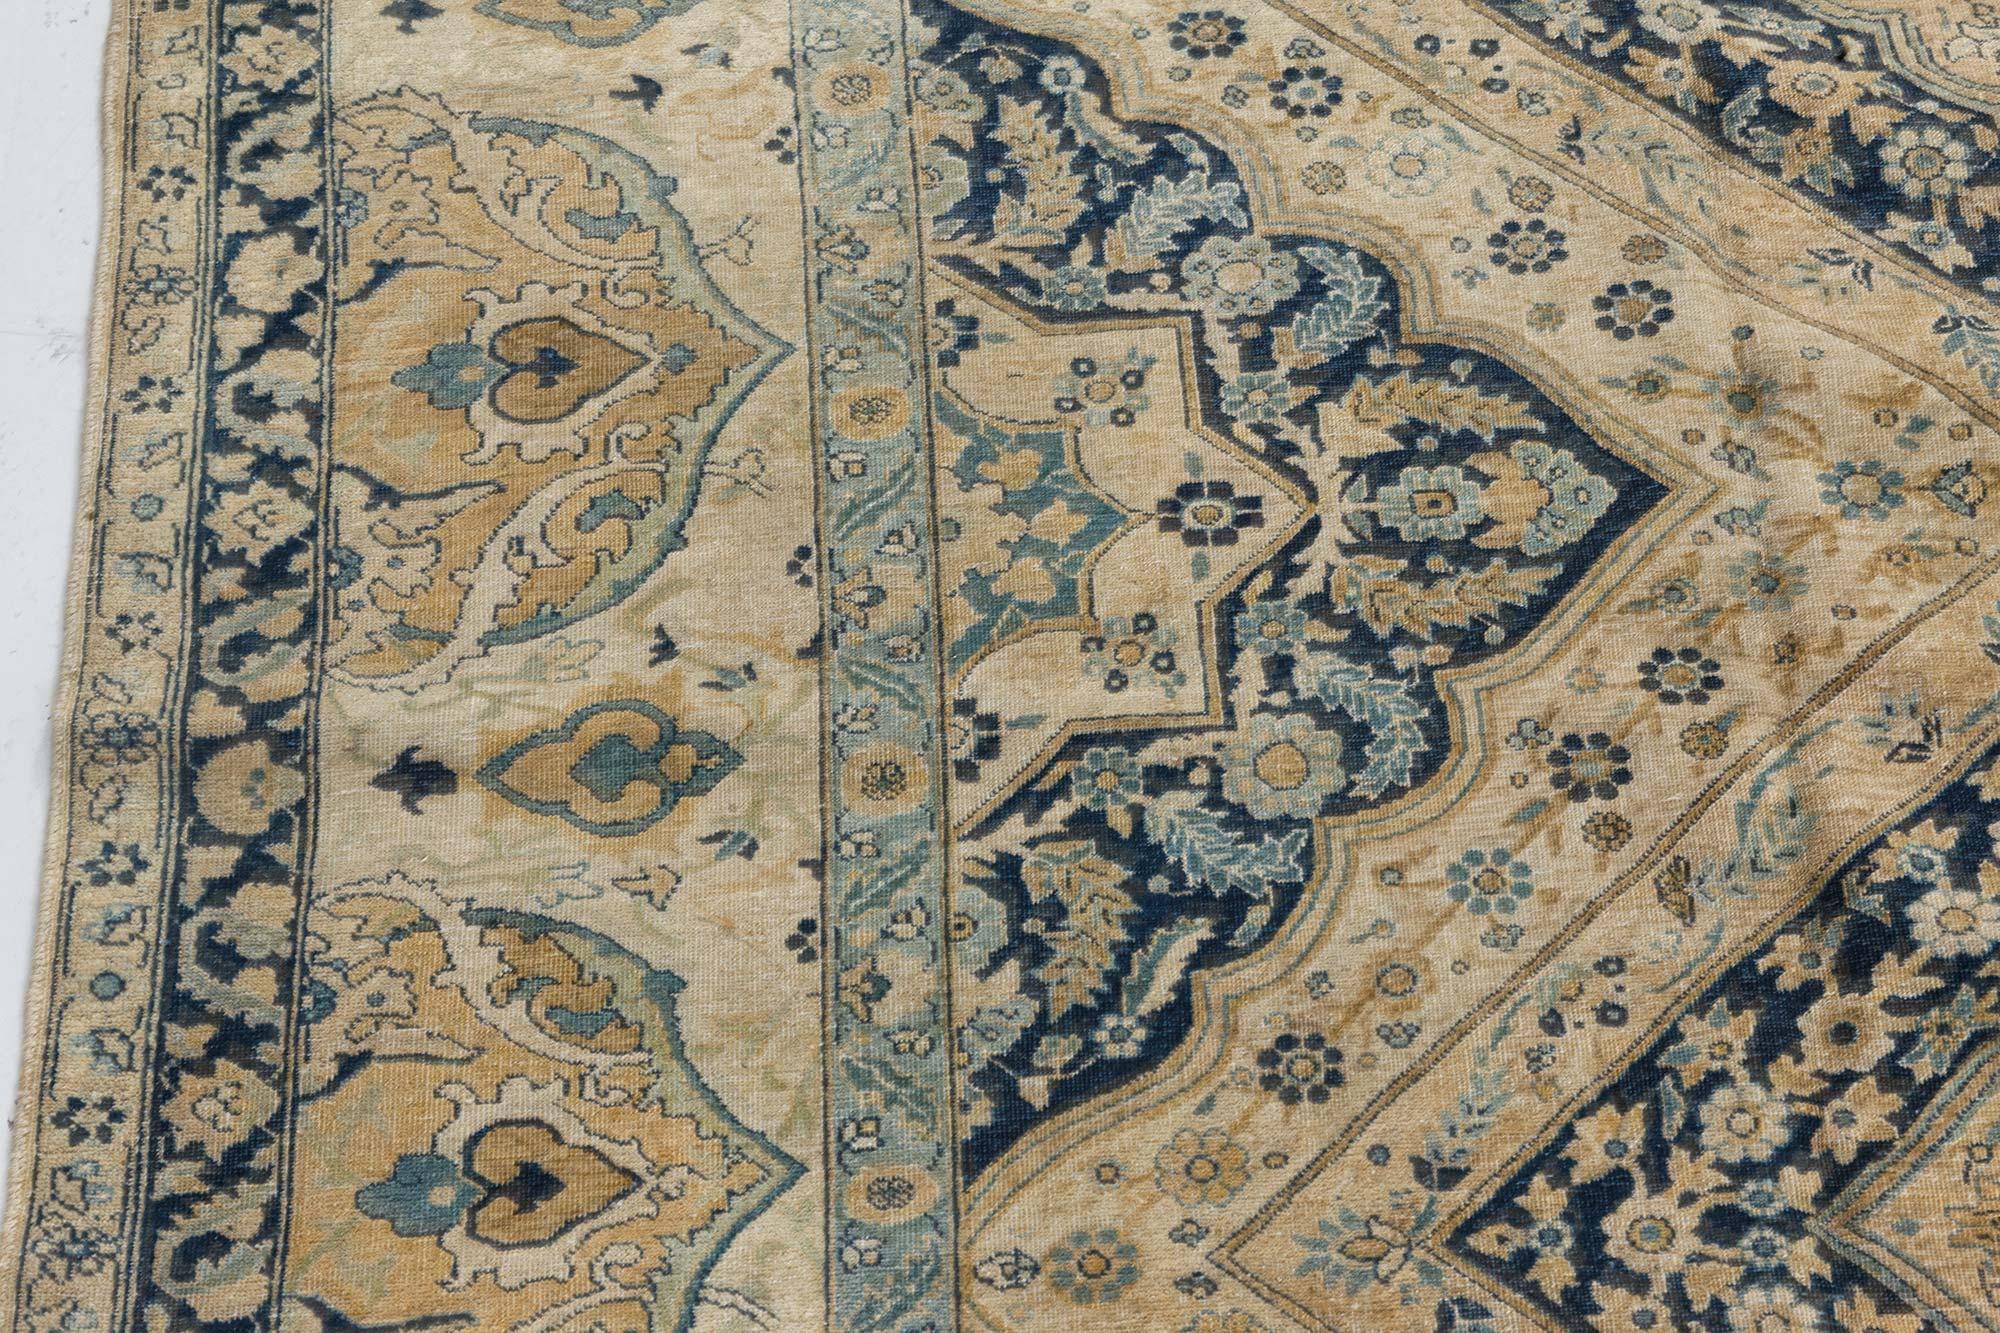 Early 20th Century Persian Tabriz Handmade Carpet In Good Condition For Sale In New York, NY